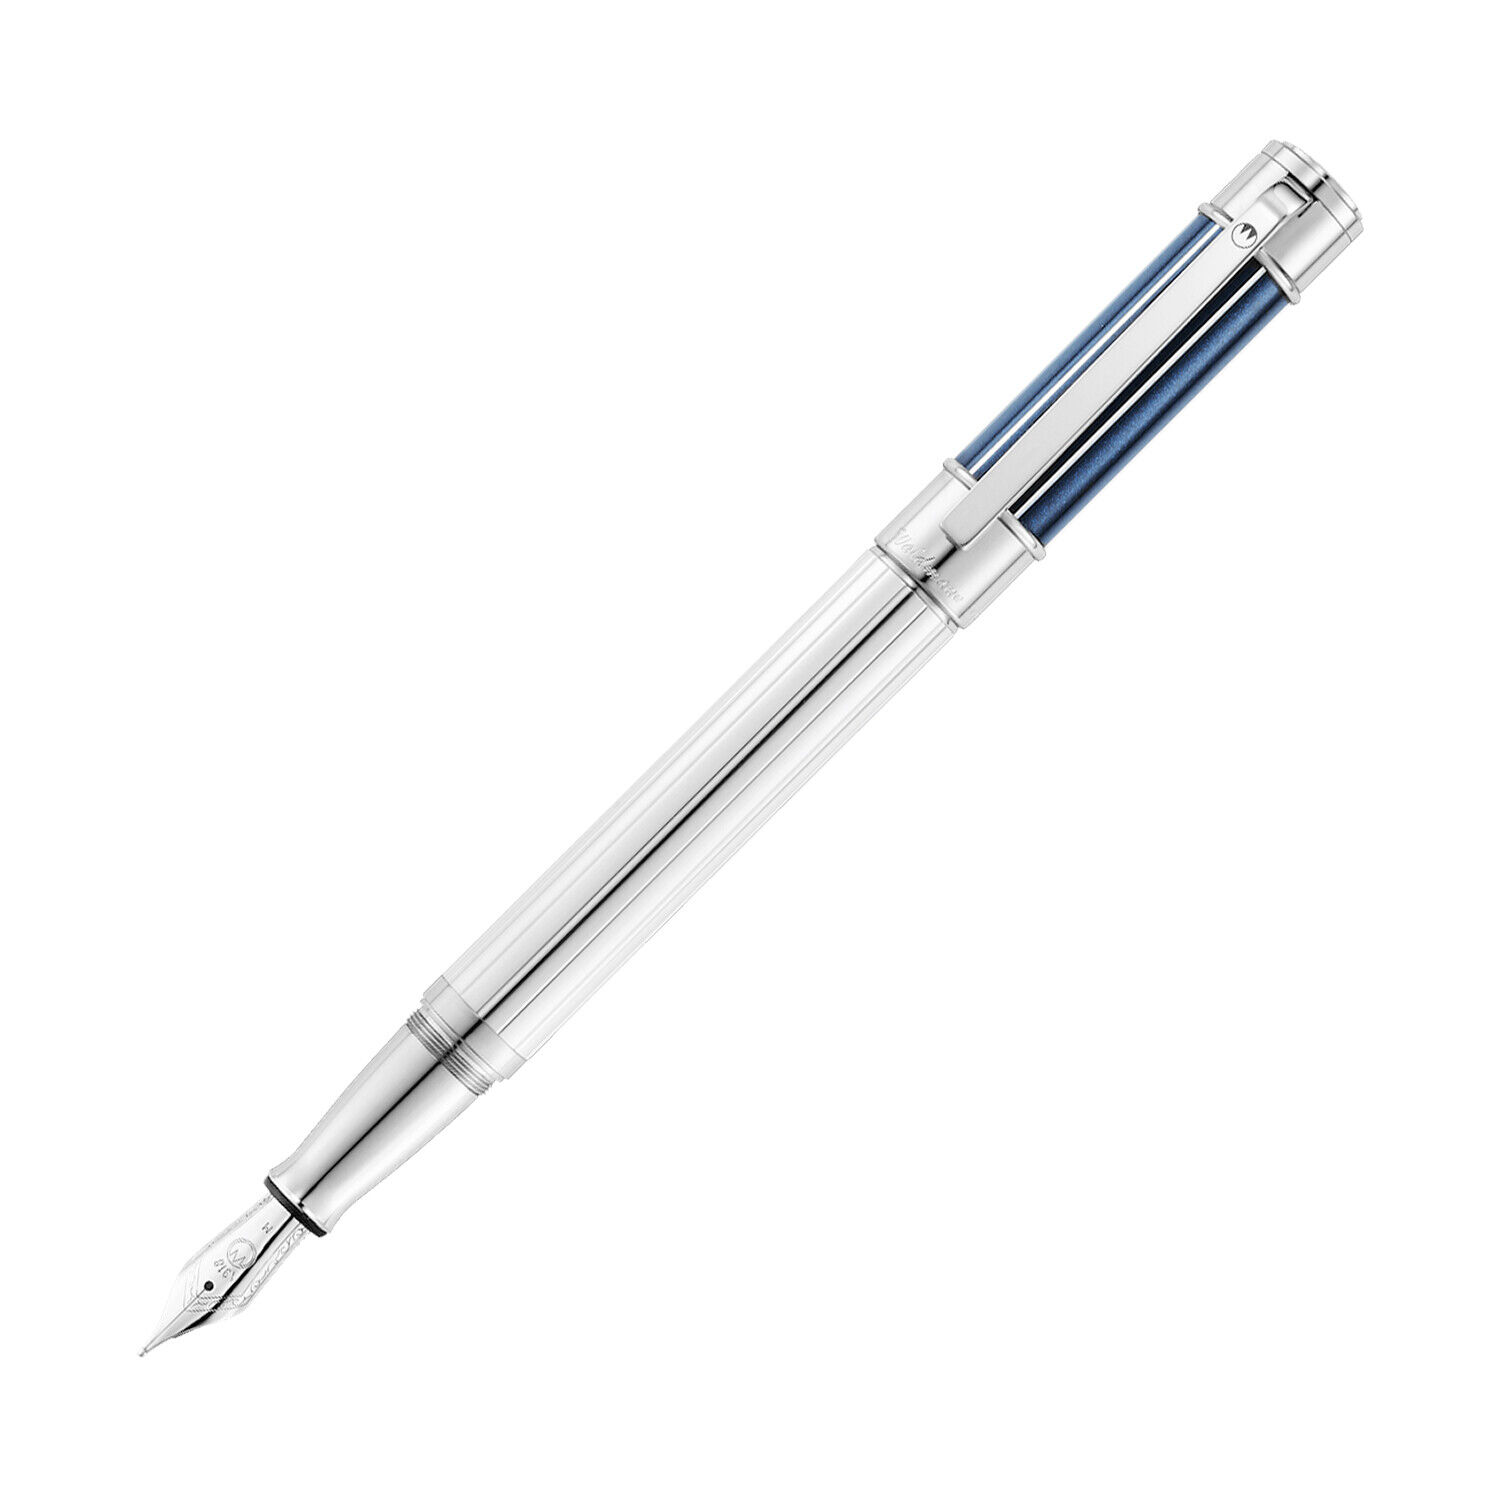 Waldmann Commander 23 Fountain Pen in Sterling Silver and Blue Lacquer, Broad